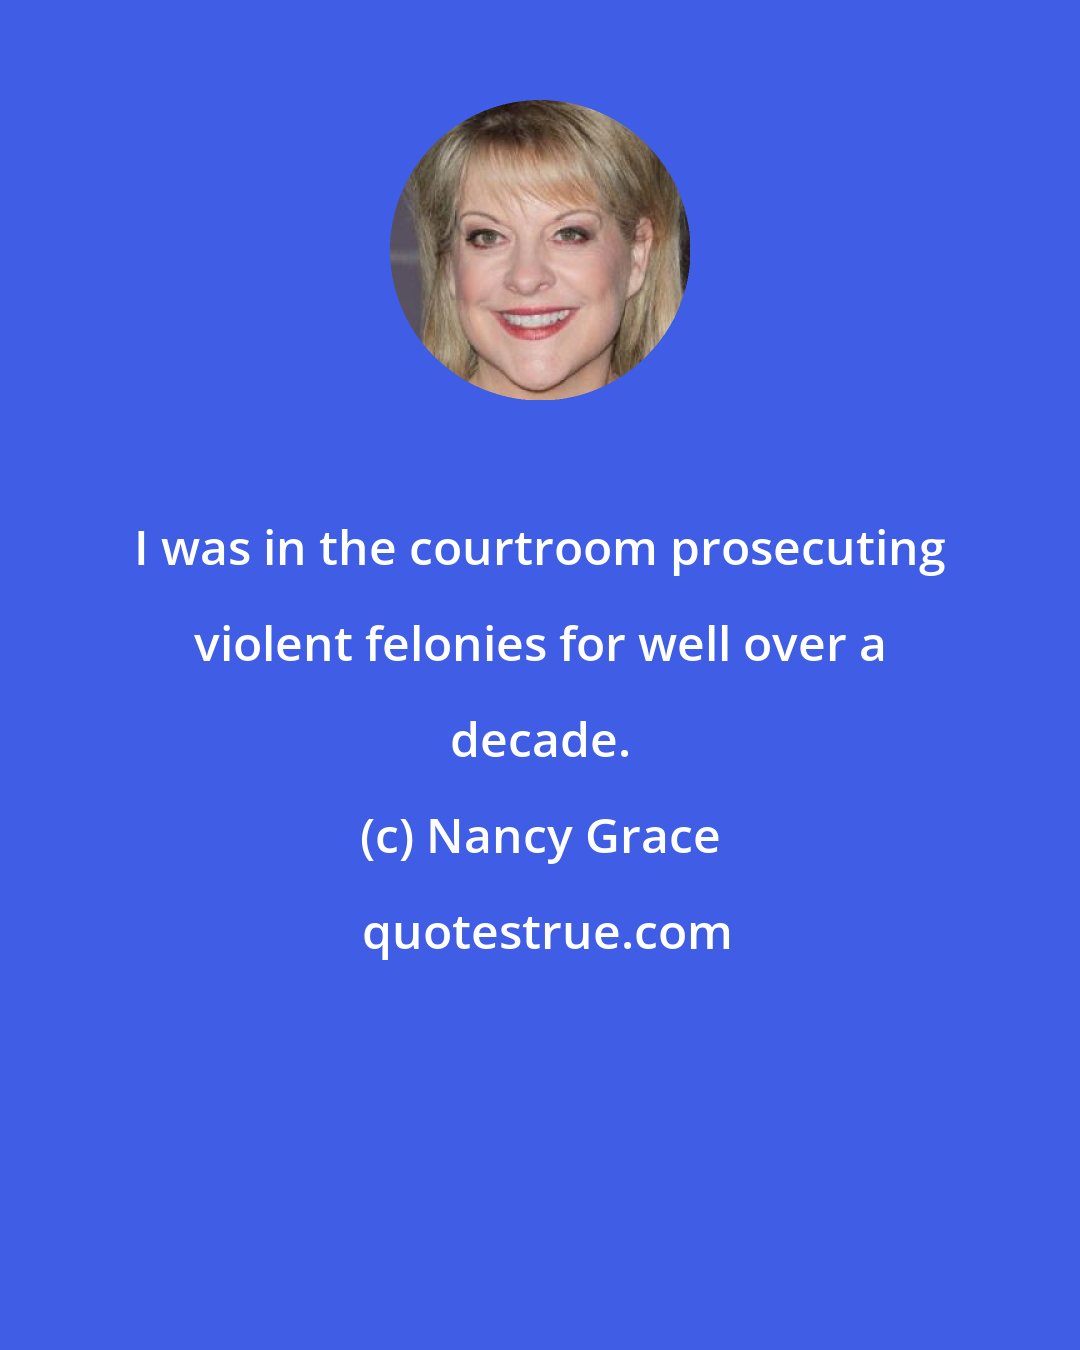 Nancy Grace: I was in the courtroom prosecuting violent felonies for well over a decade.